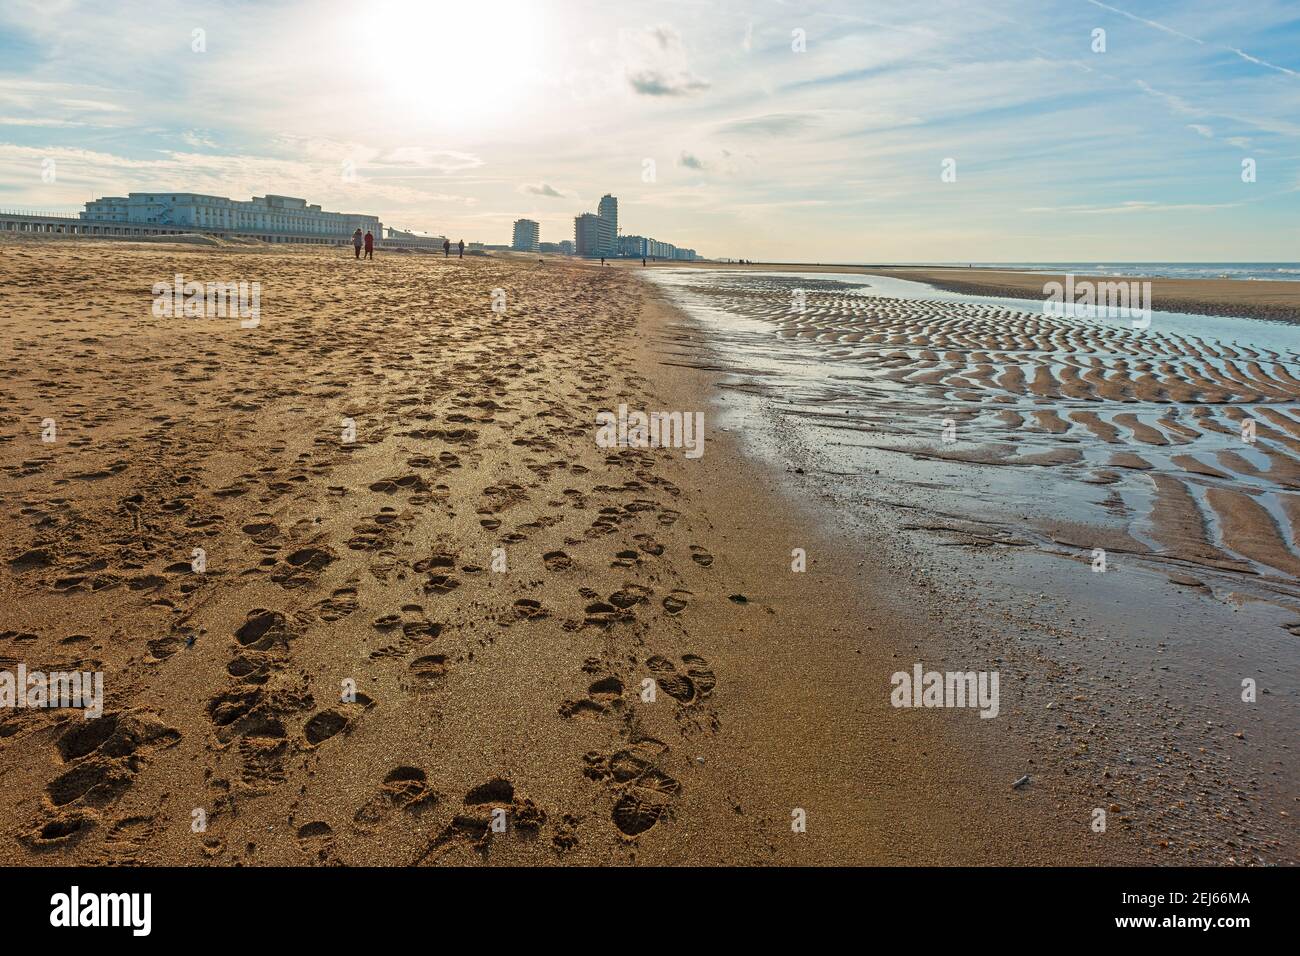 Walking trails and tracks of people on the beach of Oostende (Ostend), Belgium. Stock Photo